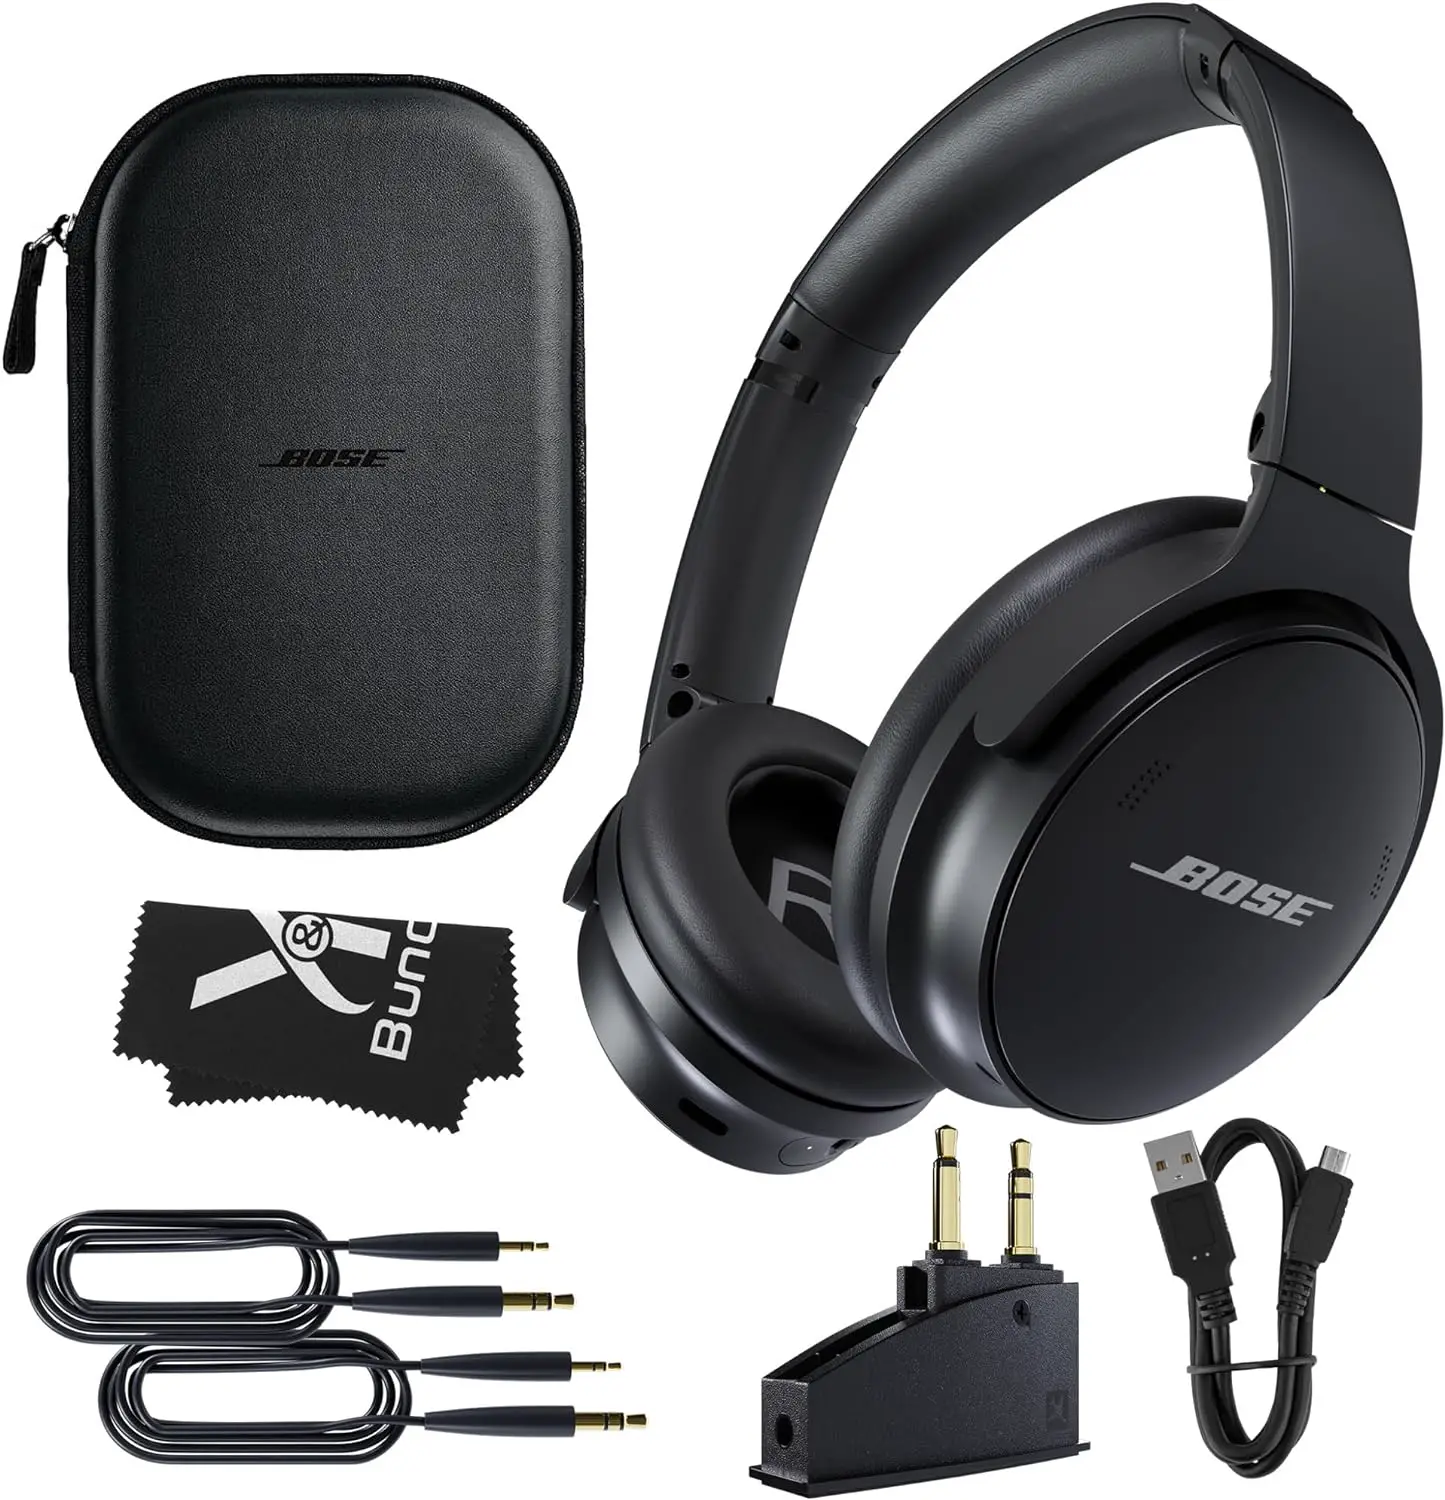 Bose QuietComfort 45 Headphones Bundle with QC15 Airplane Jack Adapter Audio Cable Cloth Bluetooth Wireless Noise Canceling Headphones Over Ear Headphones Bose Noise Cancelling Headphones Black